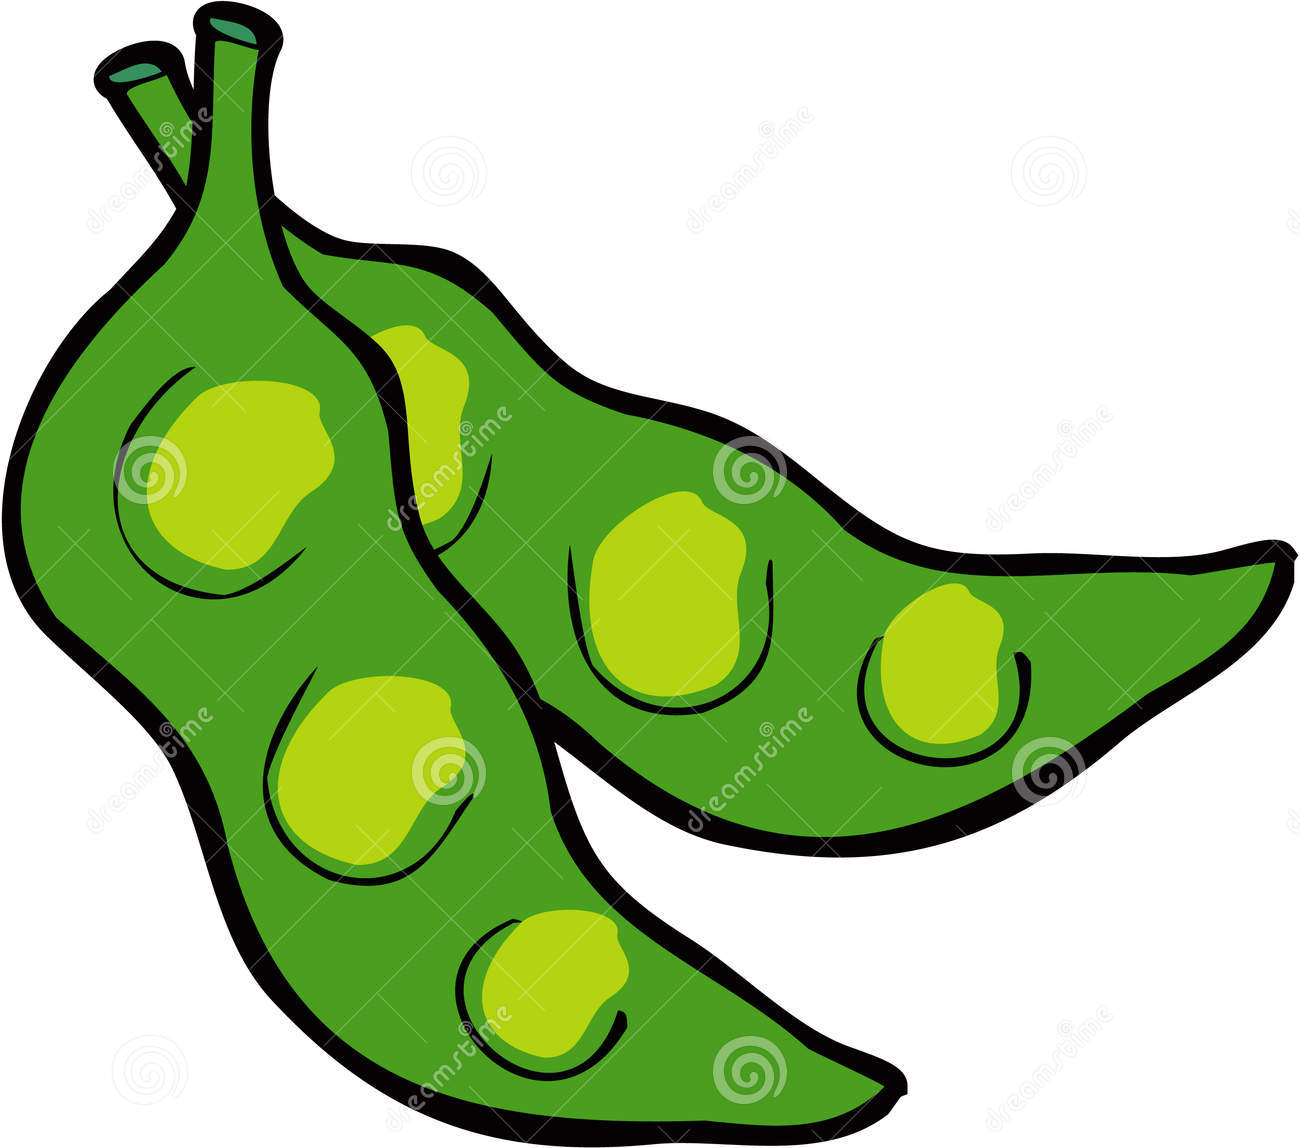 Beans clipart #8, Download drawings